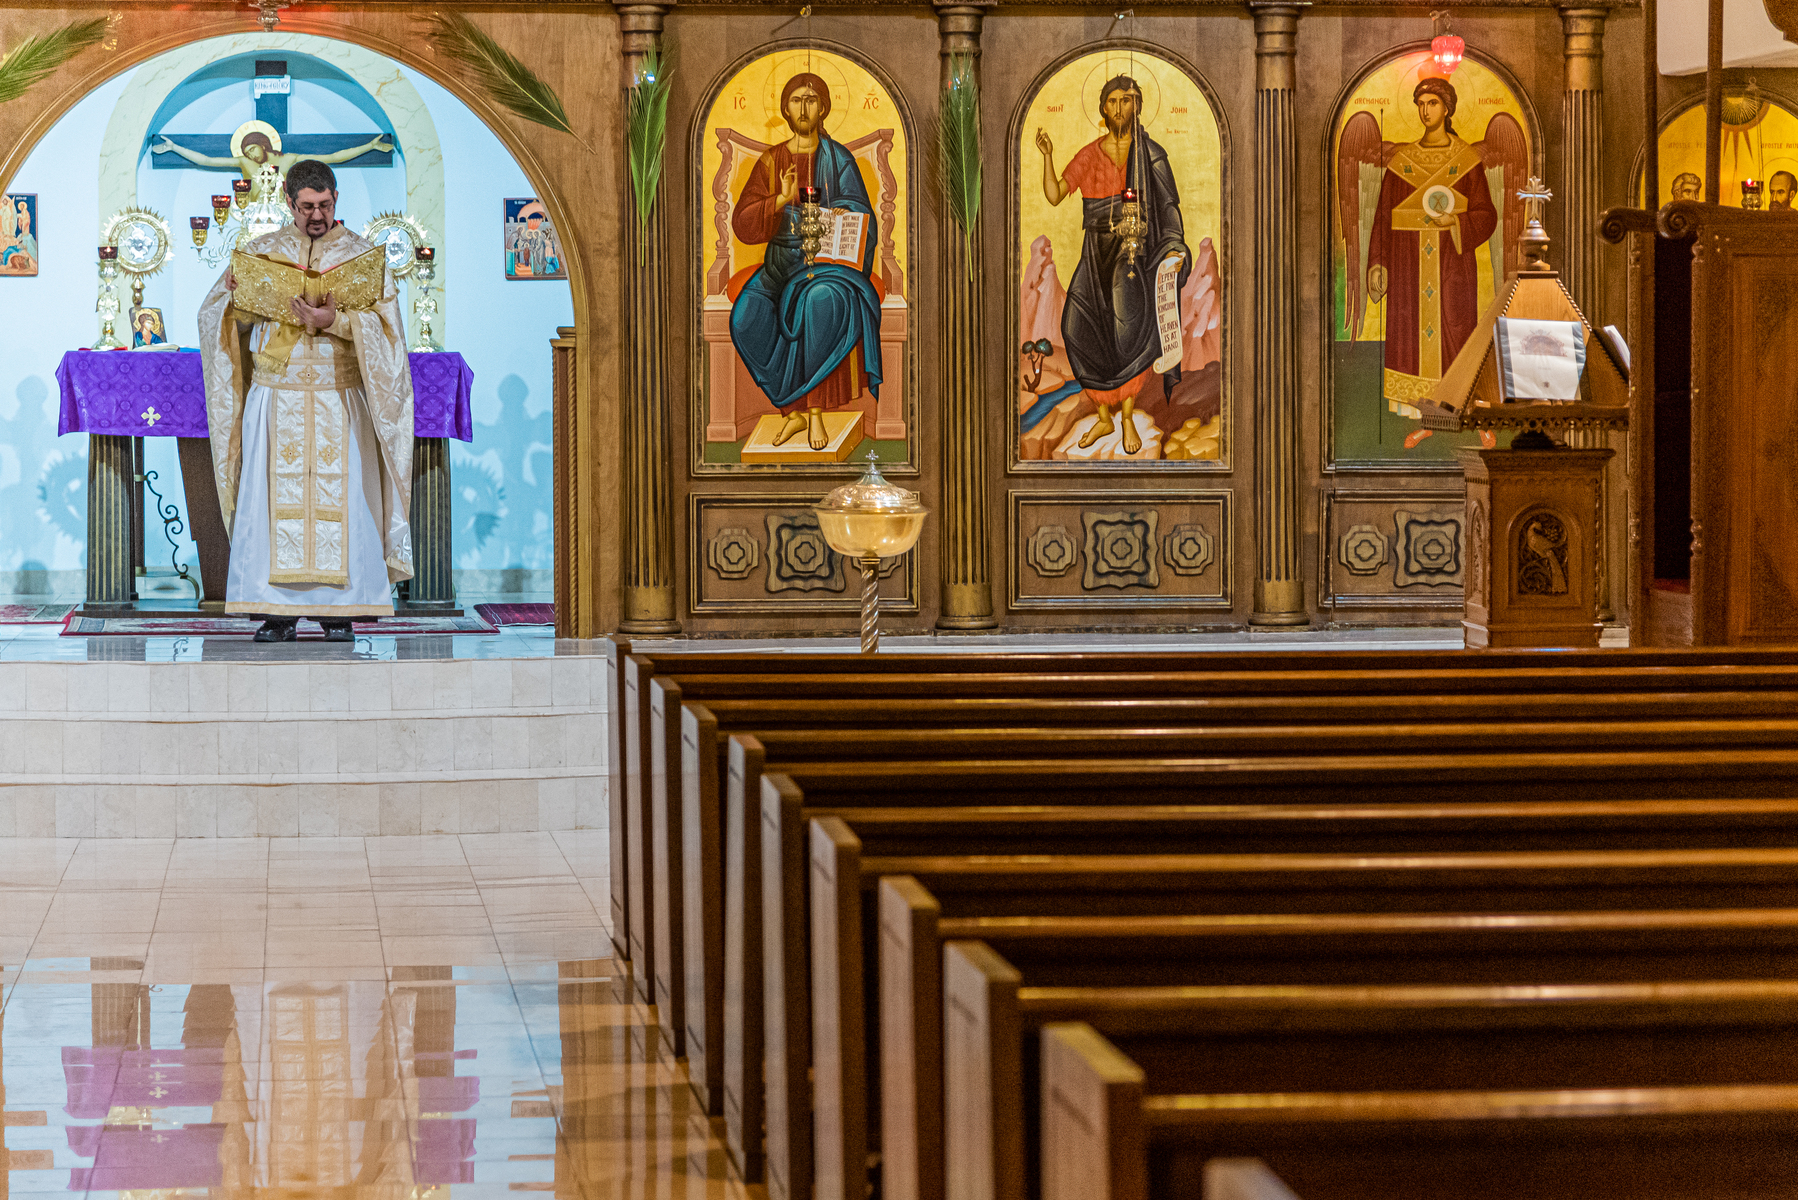 4/12/2020 - Atlanta, GA - Fr. Gabriel Tannoush reads the Gospel to an empty church on Orthodox Palm Sunday. Due to Covid-19, the church was closed to parishioners, but services continued via social media streaming.